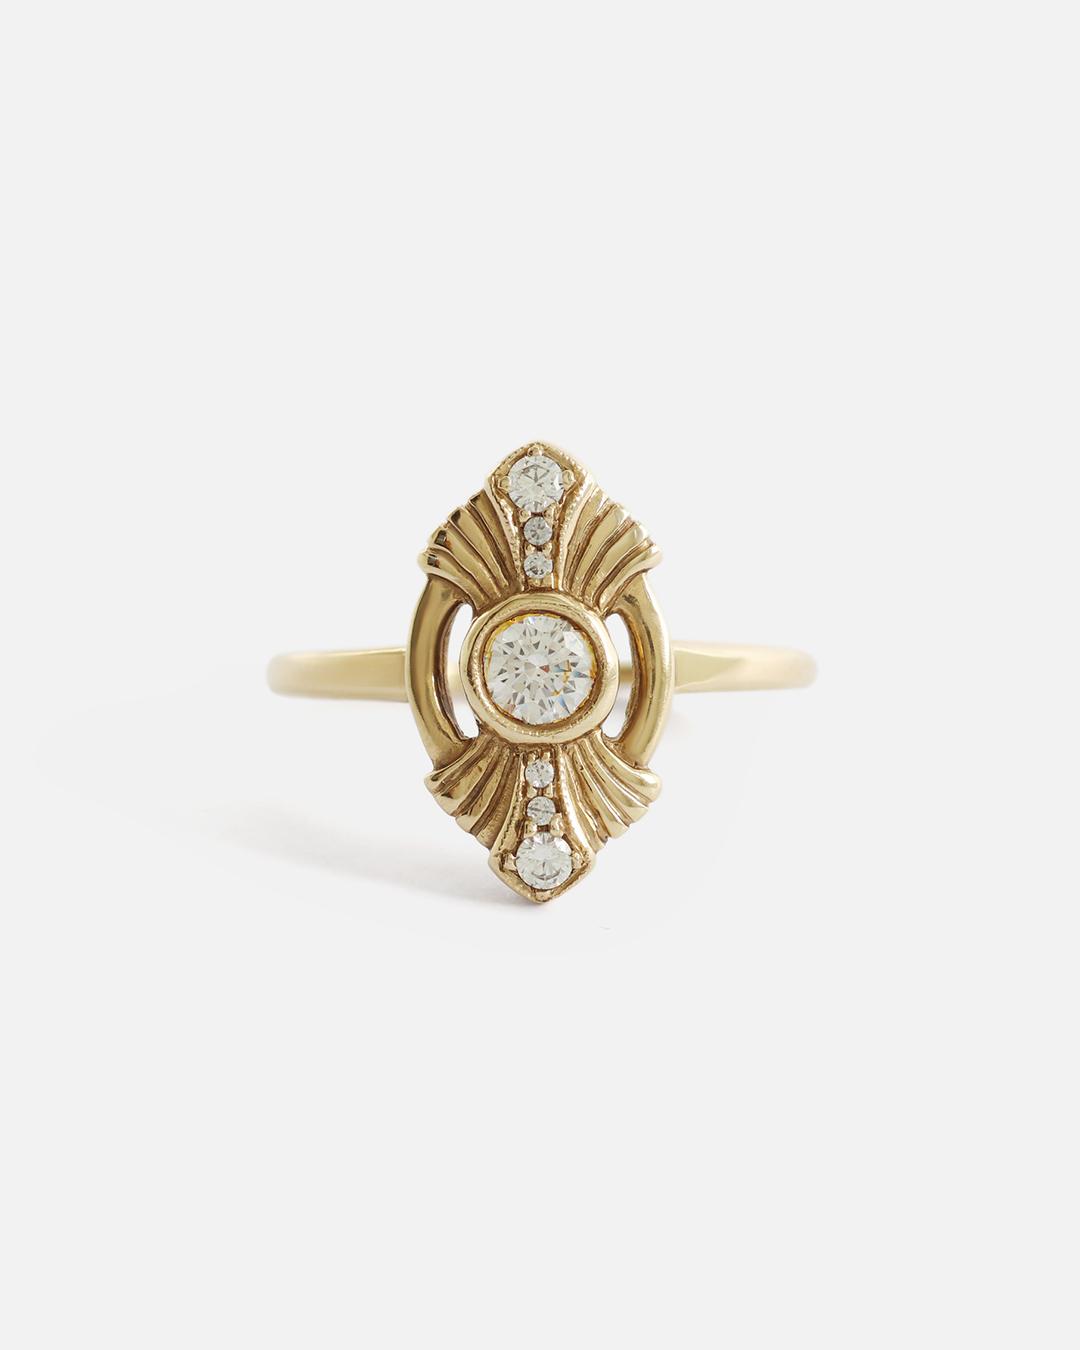 Gatsby Ring / White Diamonds By Katrina La Penne in Engagement Rings Category